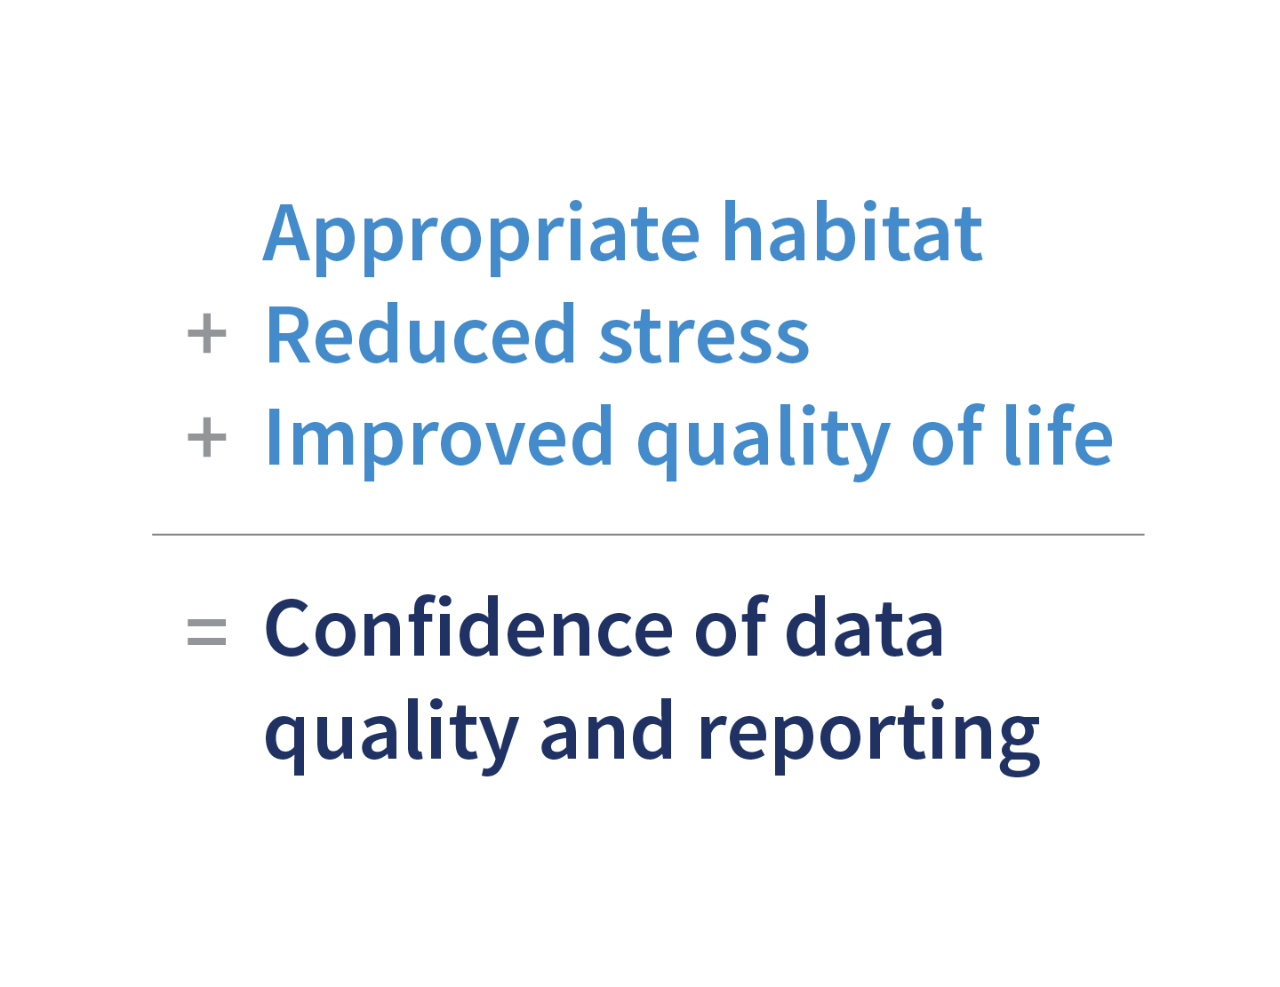 Confidence of data quality and reporting